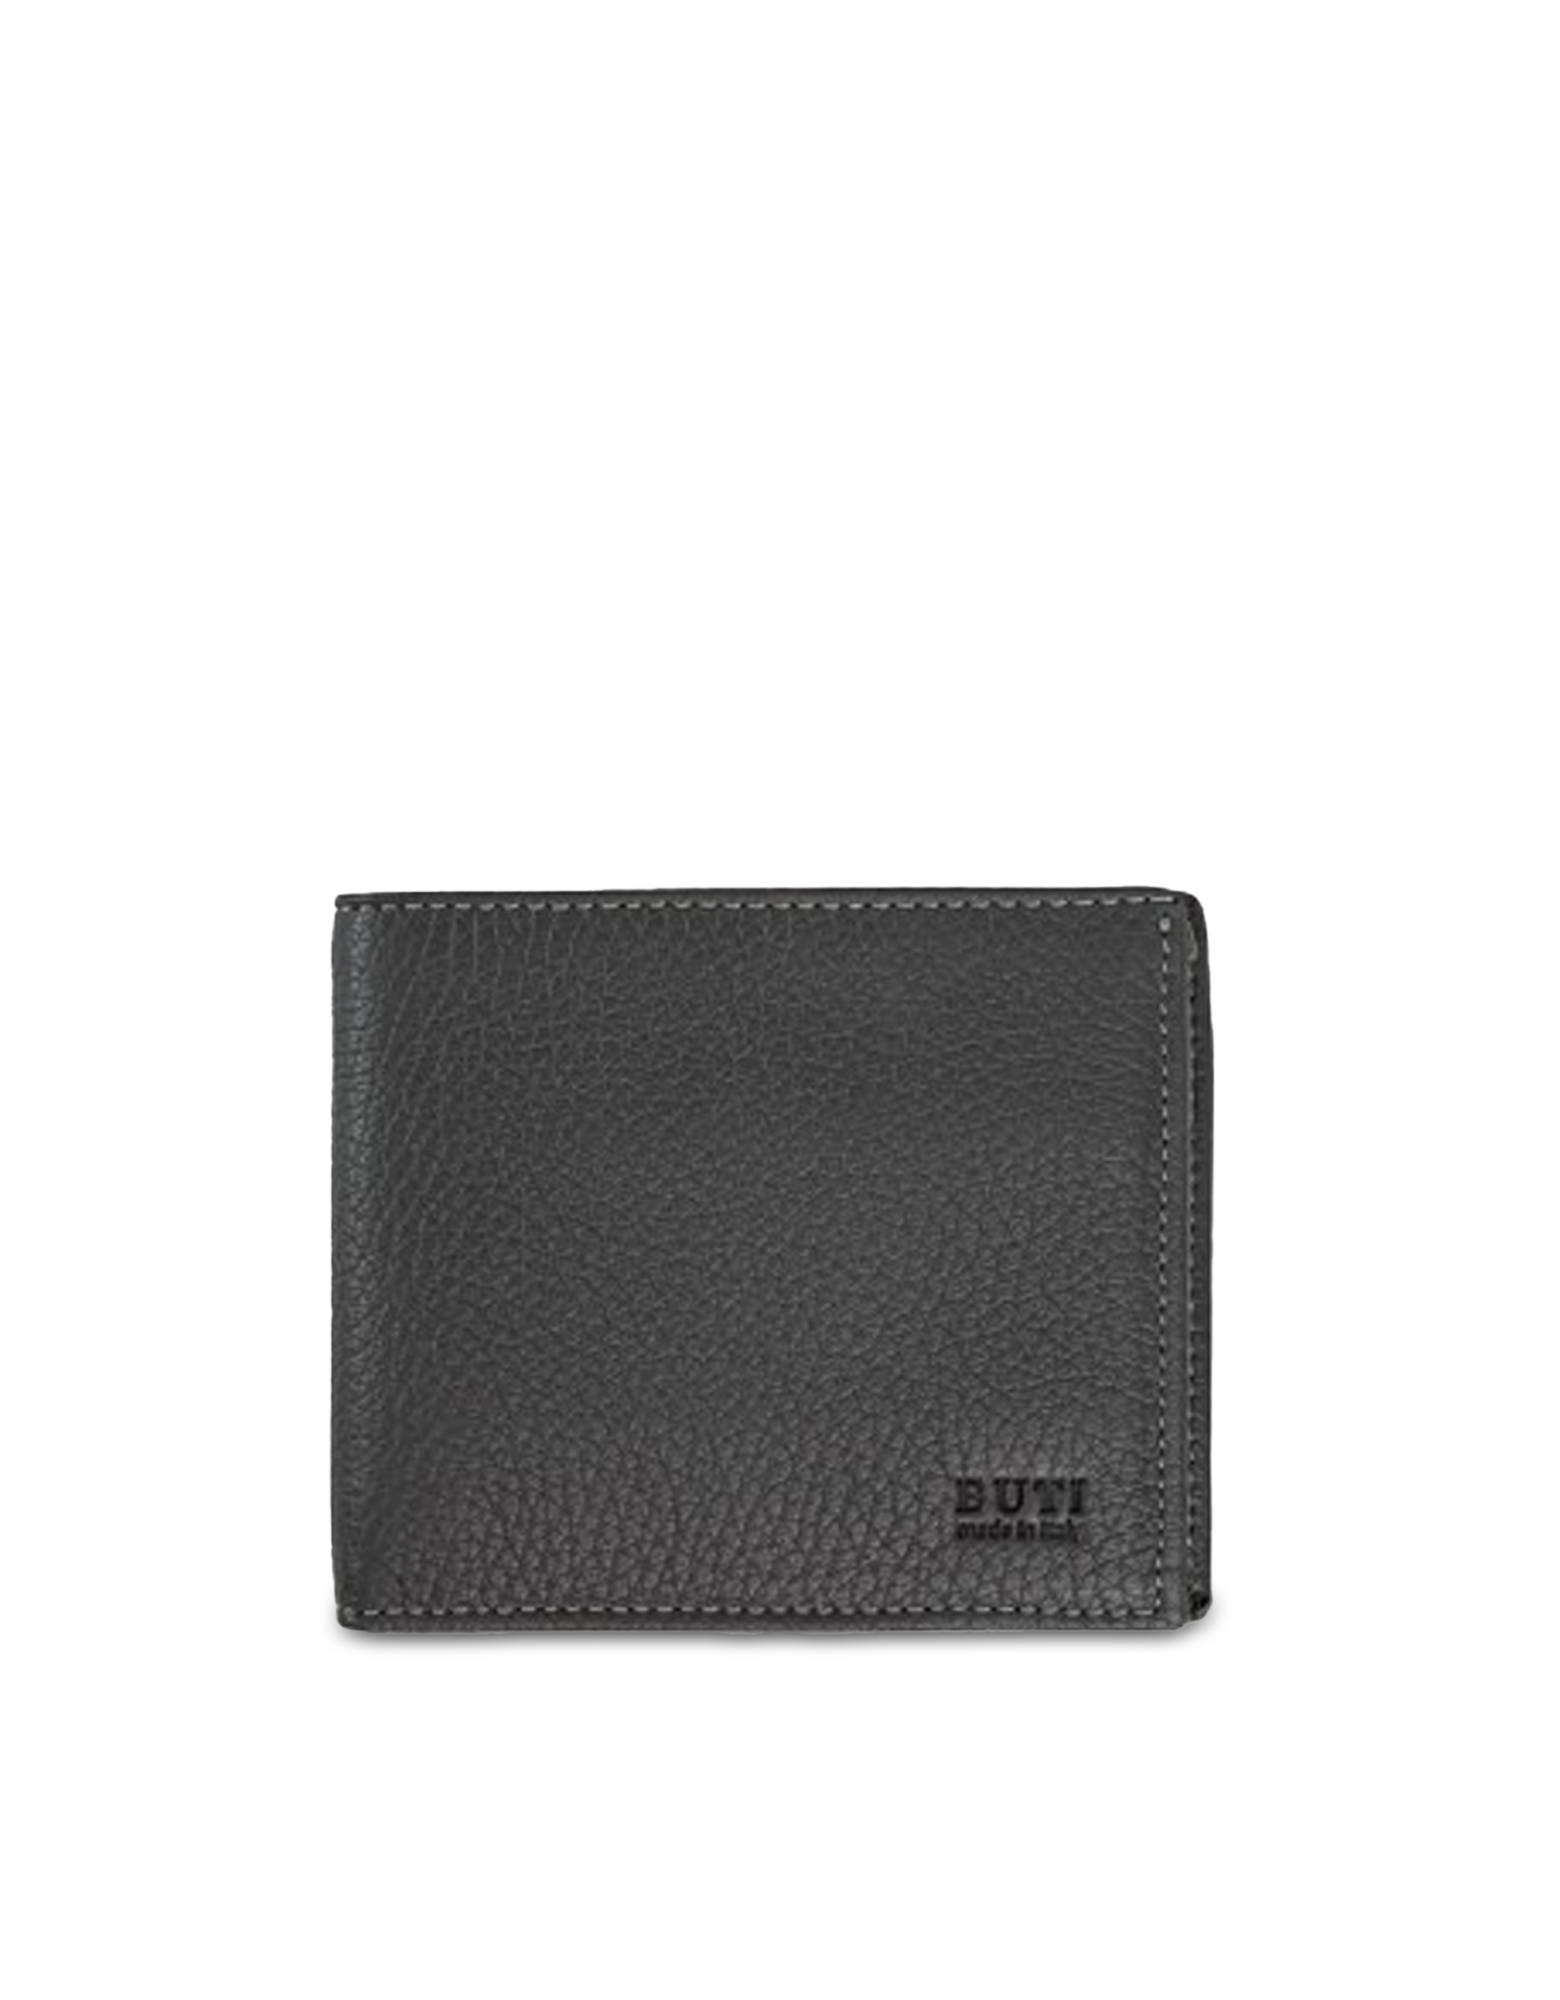 Buti Squared Embossed Leather Men's Wallet